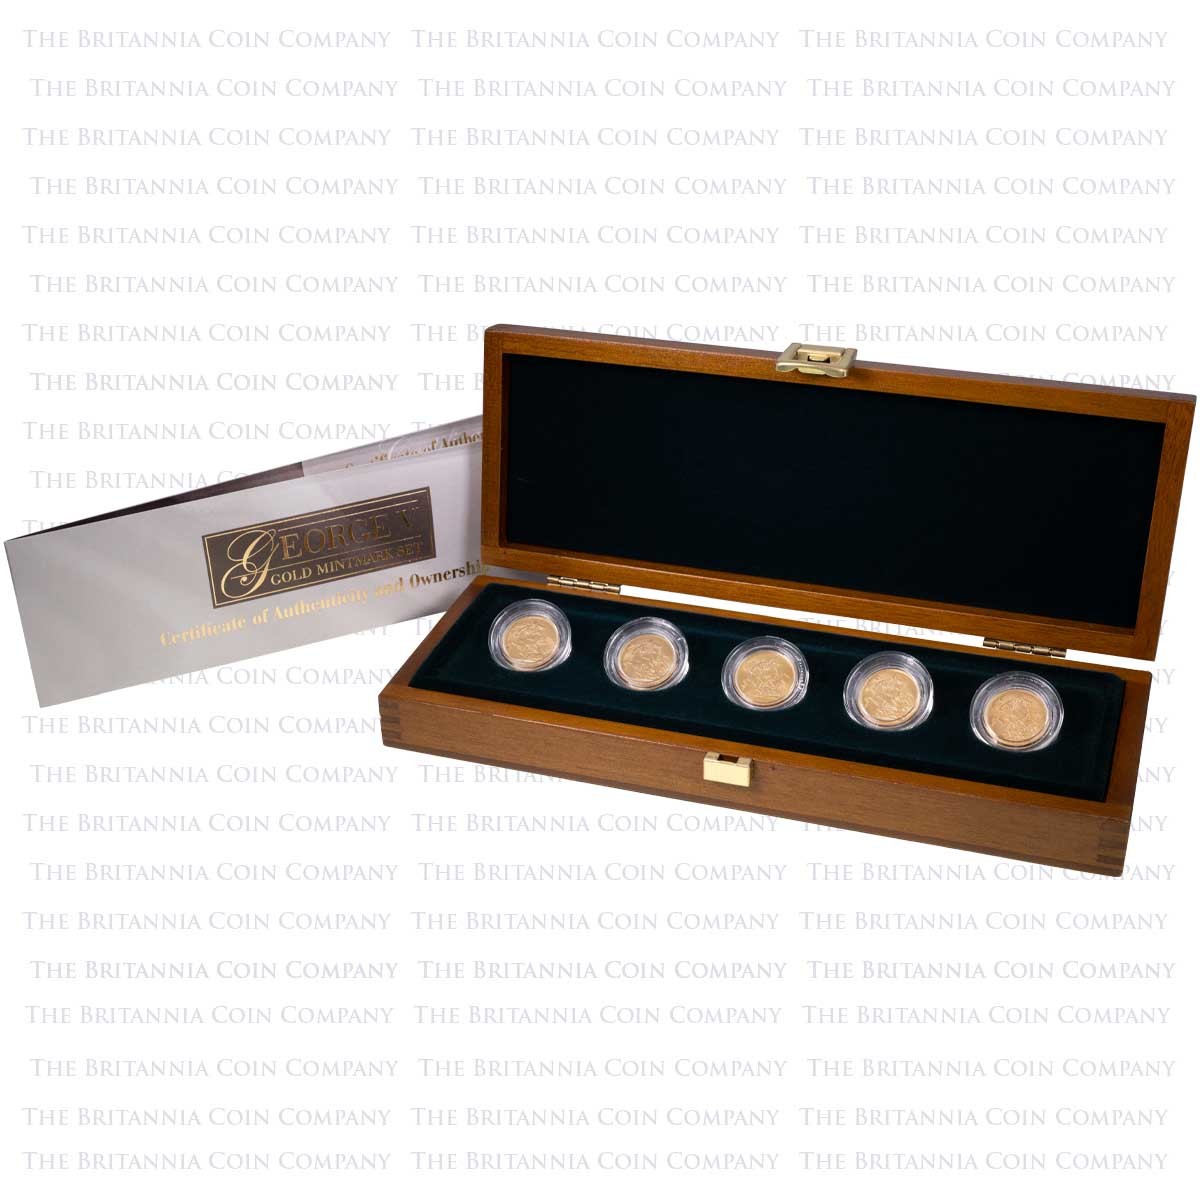 King George V Gold Full Sovereign Five Coin Mintmark Collection Boxed